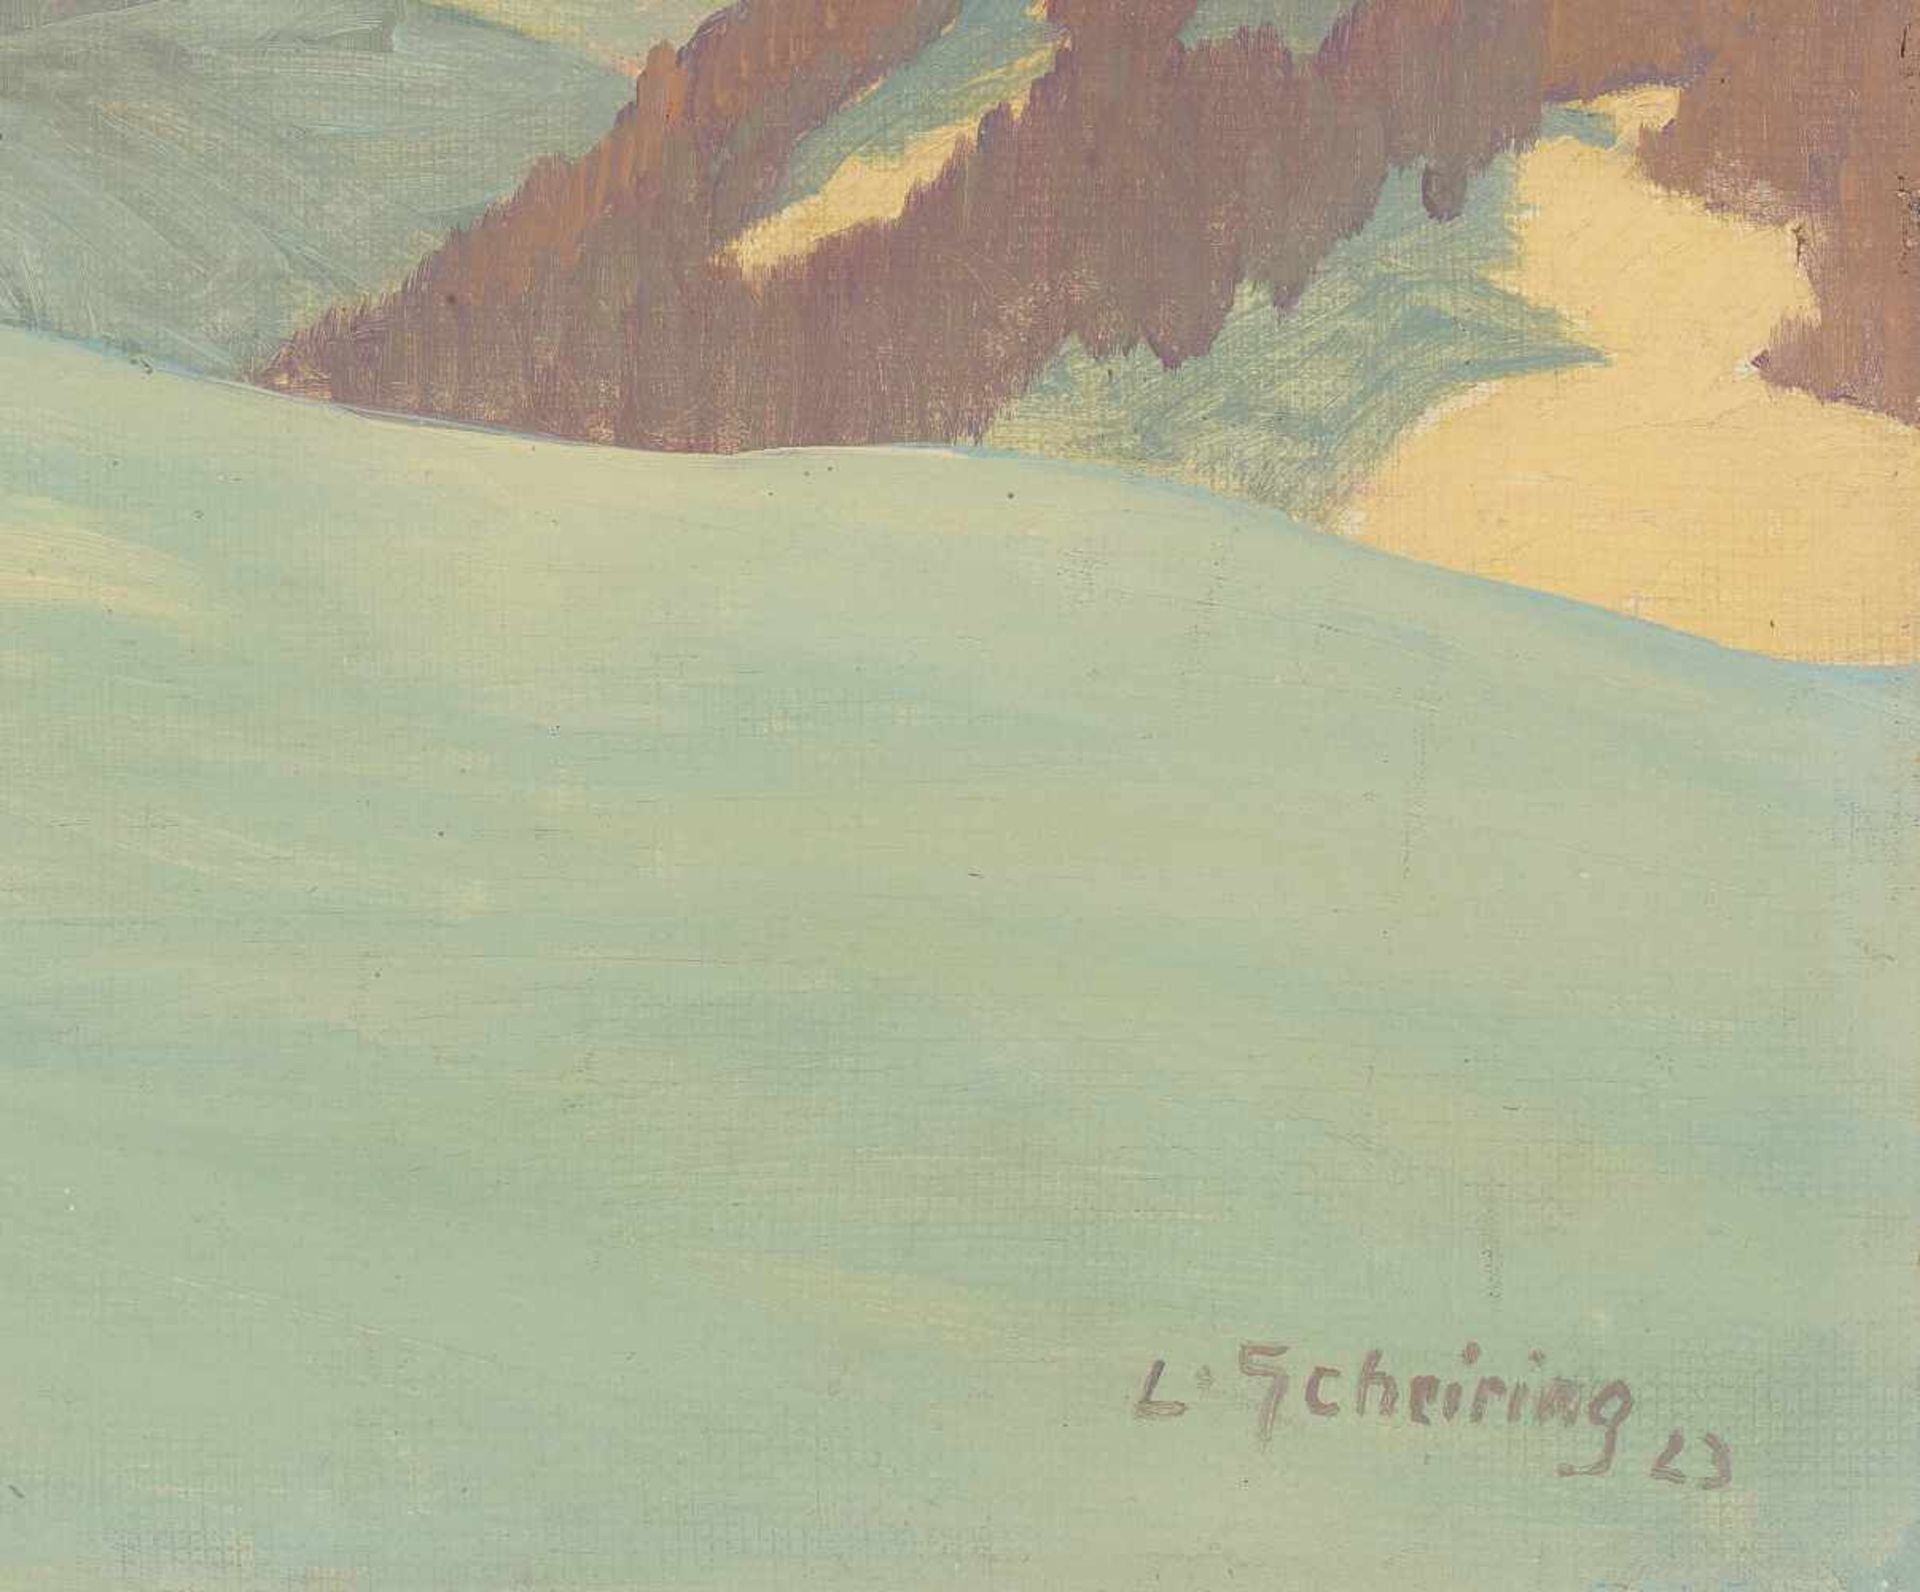 LEOPOLD SCHEIRING (1884-1927), OIL PAINTING ‘SNOWY MOUNTAINS’ 1923Leopold Scheiring (1884-1927)Oil - Image 4 of 9